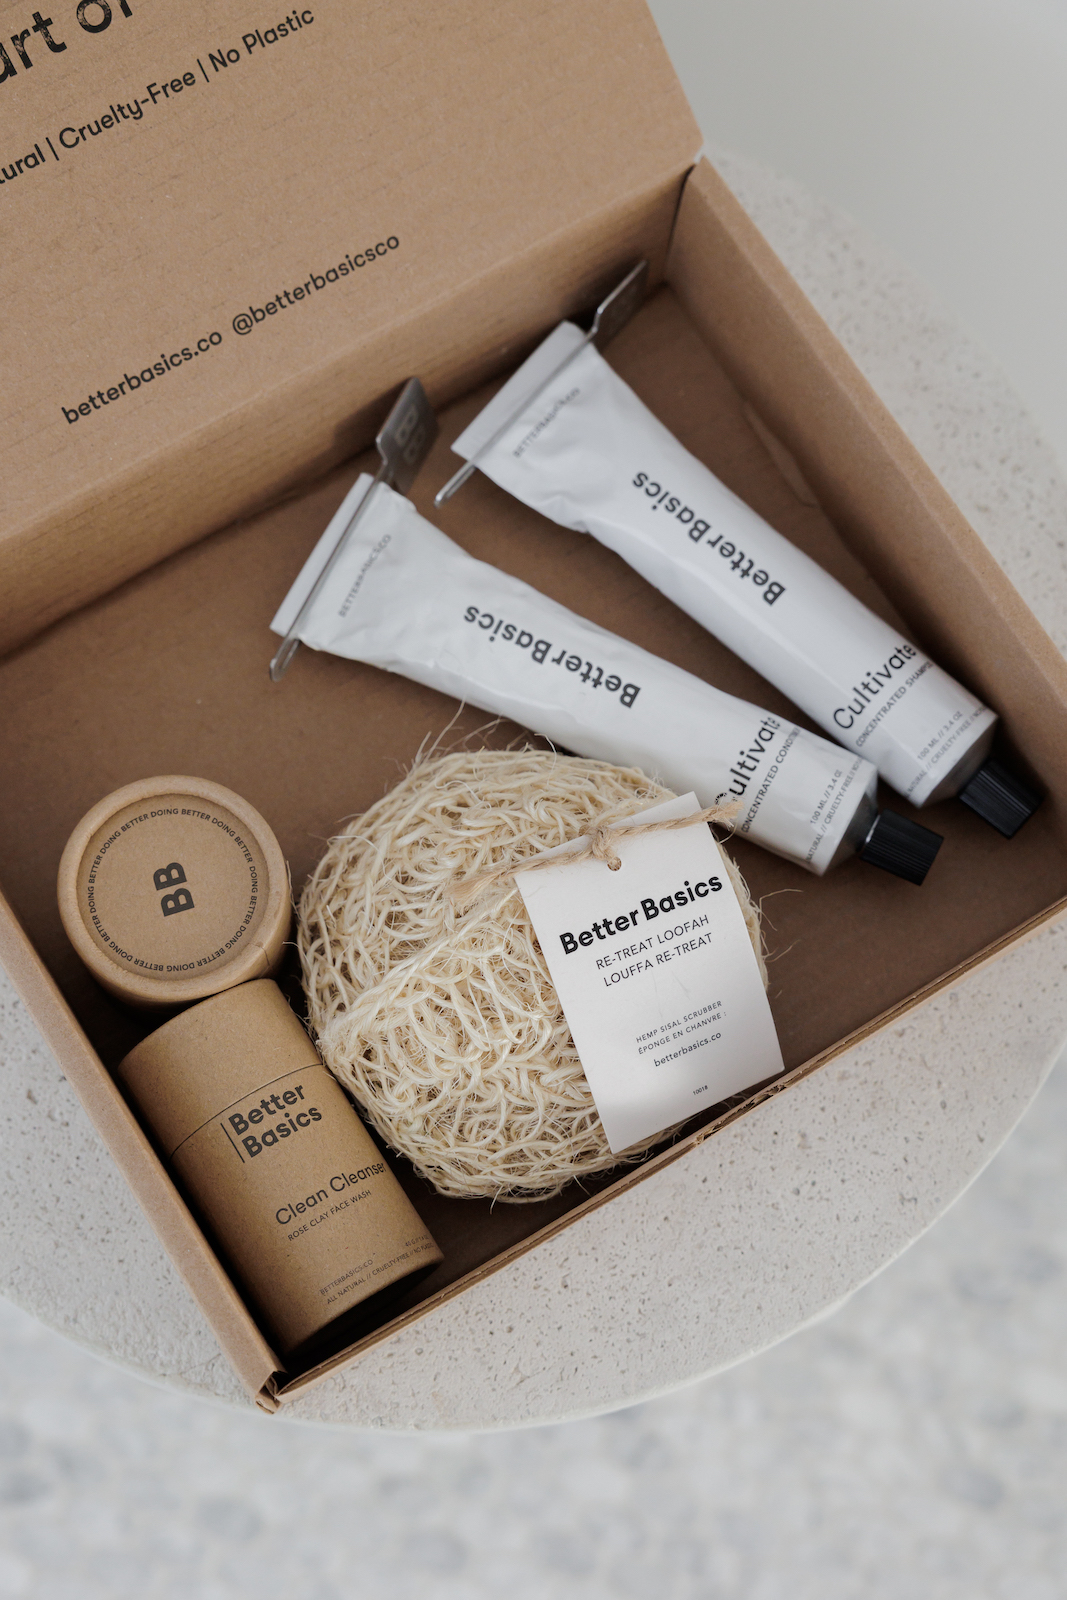 Box containing cleansing products